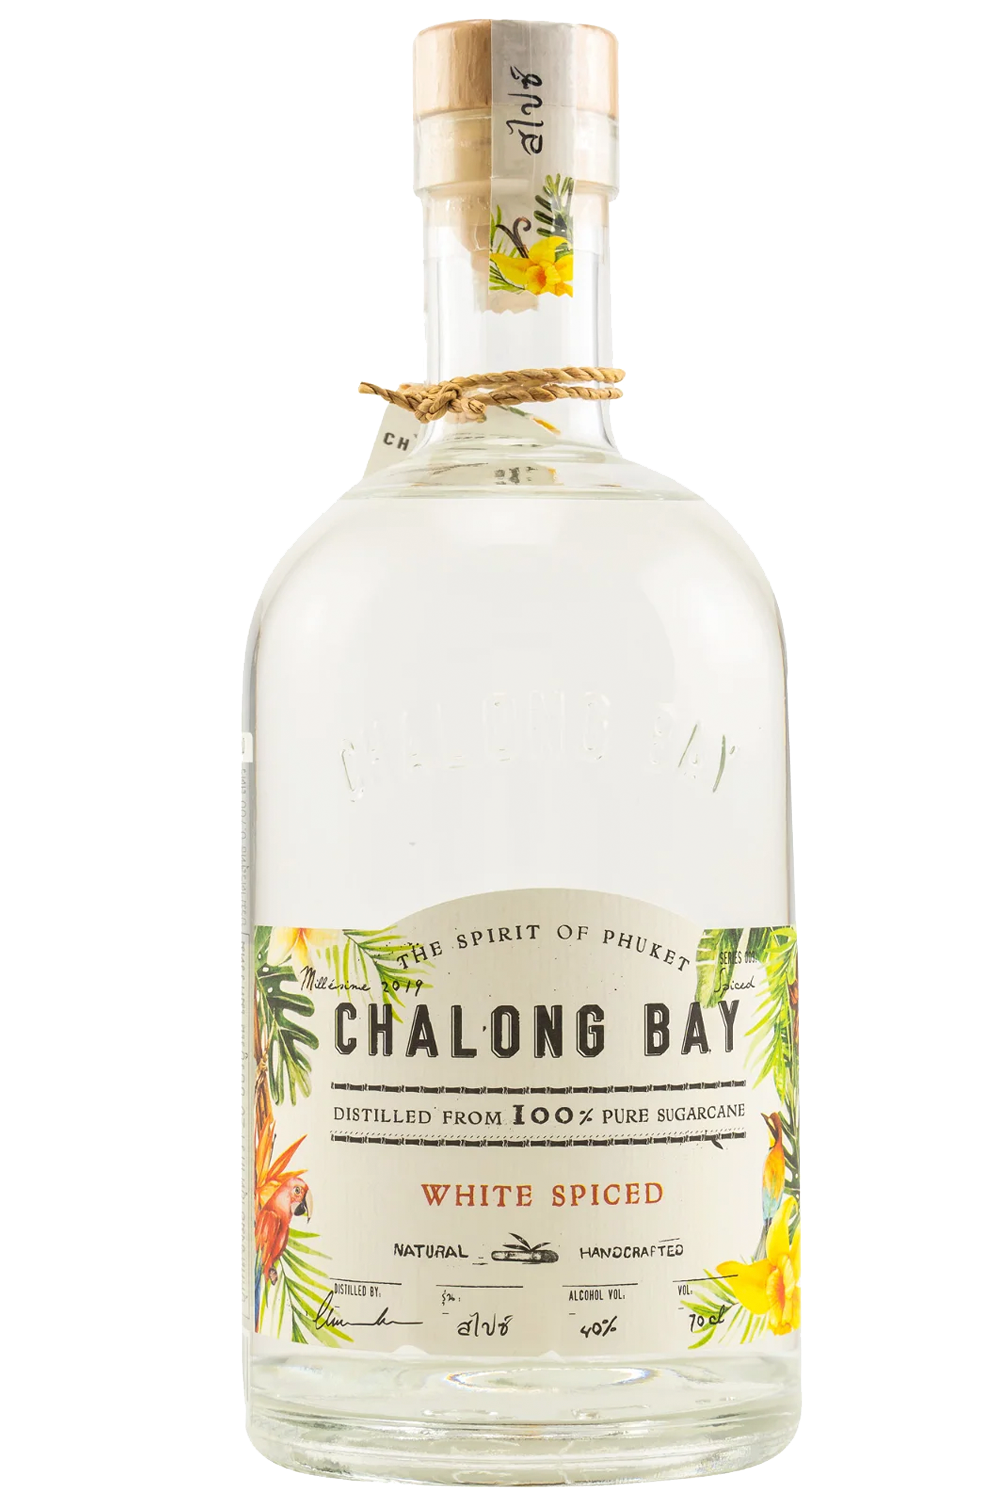 WineVins Chalong Bay White Spiced